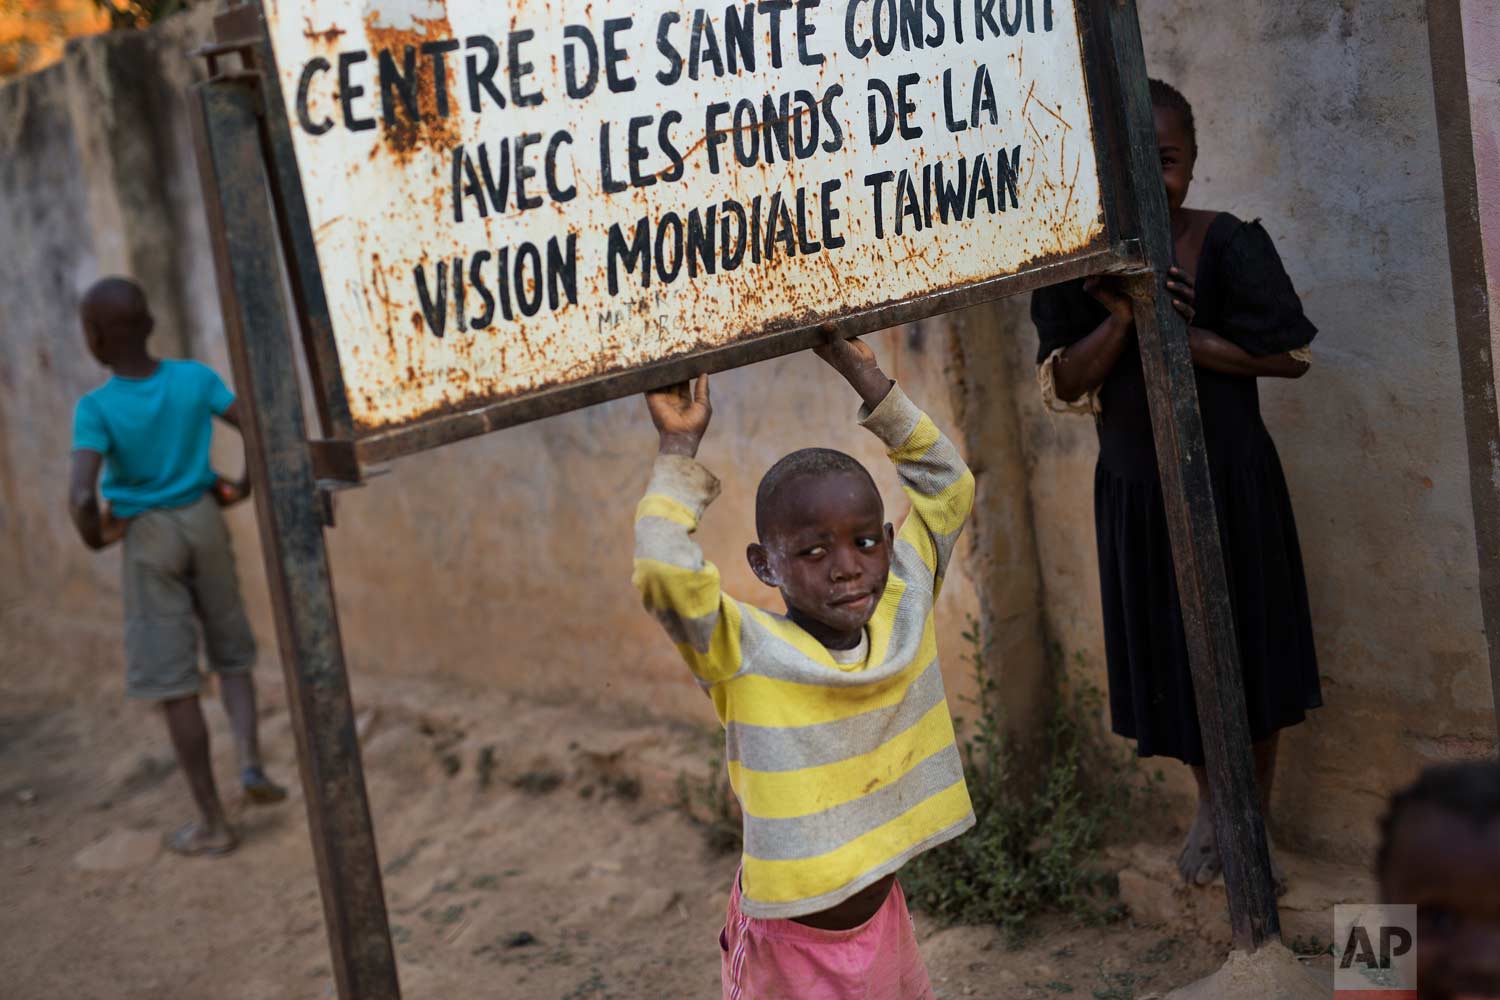  A child plays under a sign reading, "health center built with funding from Taiwan World Vision Funds" at the Mama Wa Mapendo clinic in Lubumbashi, Democratic Republic of the Congo on Tuesday, Aug. 14, 2018. (AP Photo/Jerome Delay) 